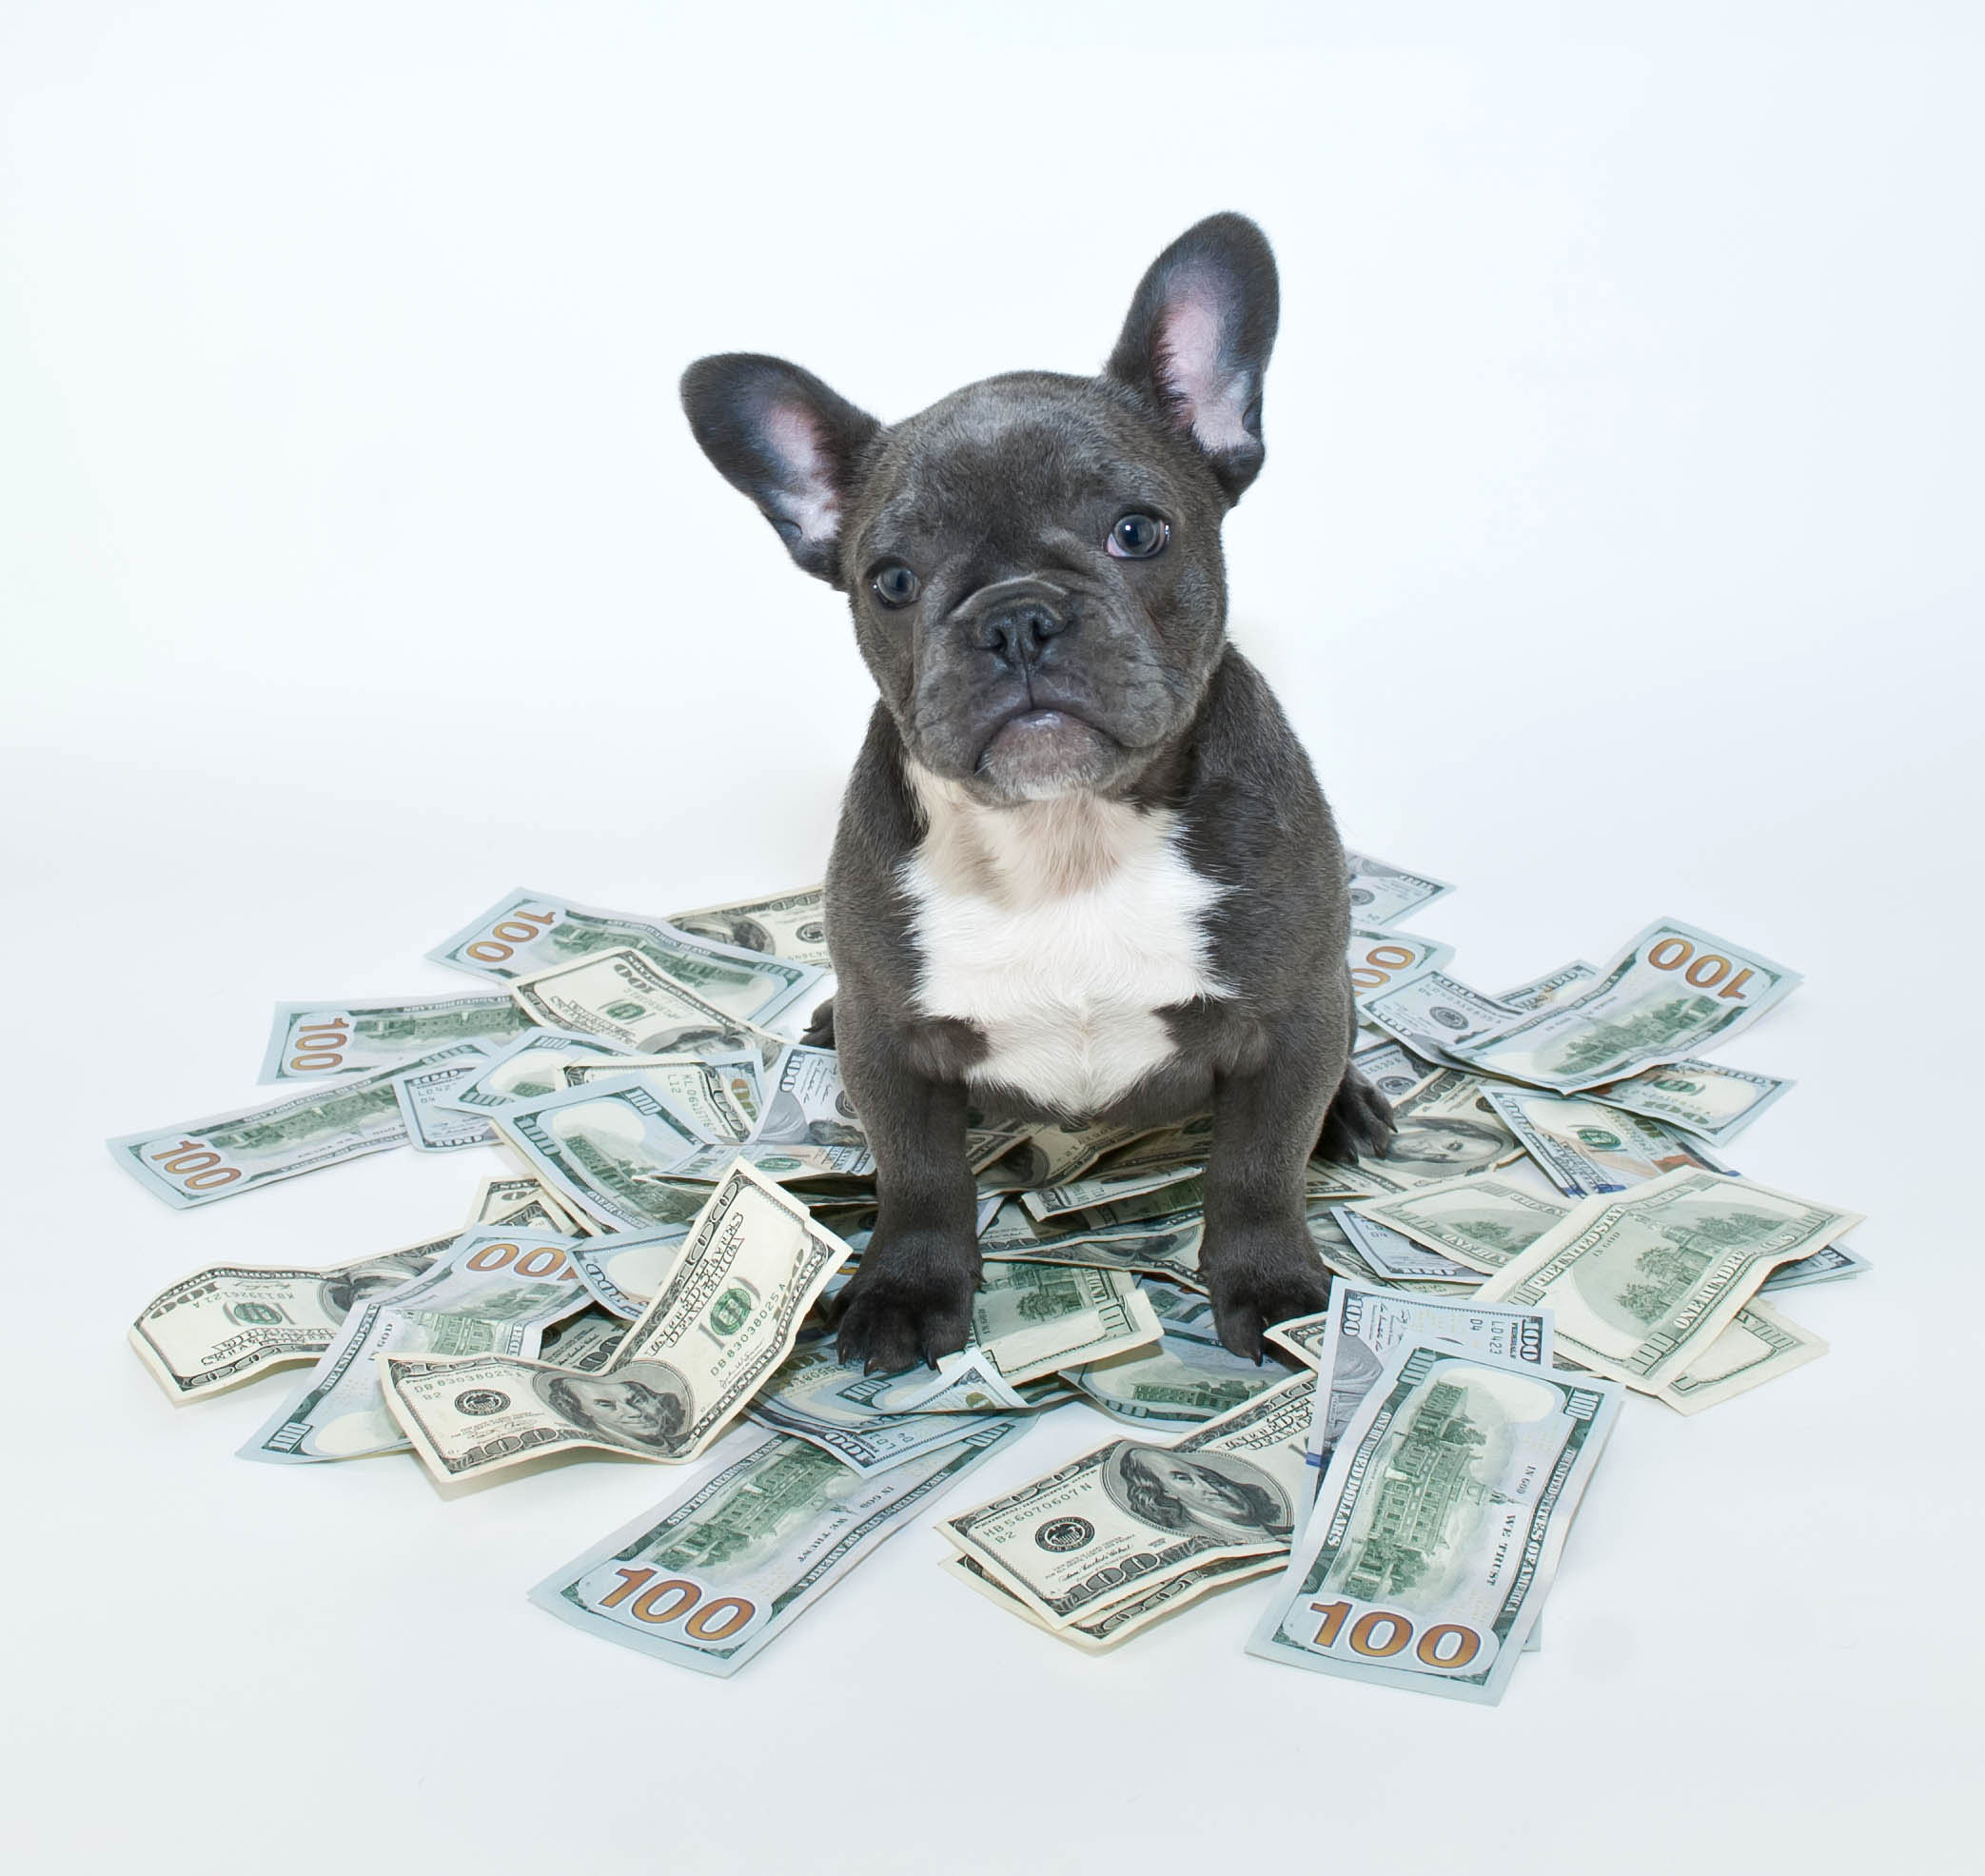 French bulldog puppy sitting in the middle of a pile of hundred dollar bills.